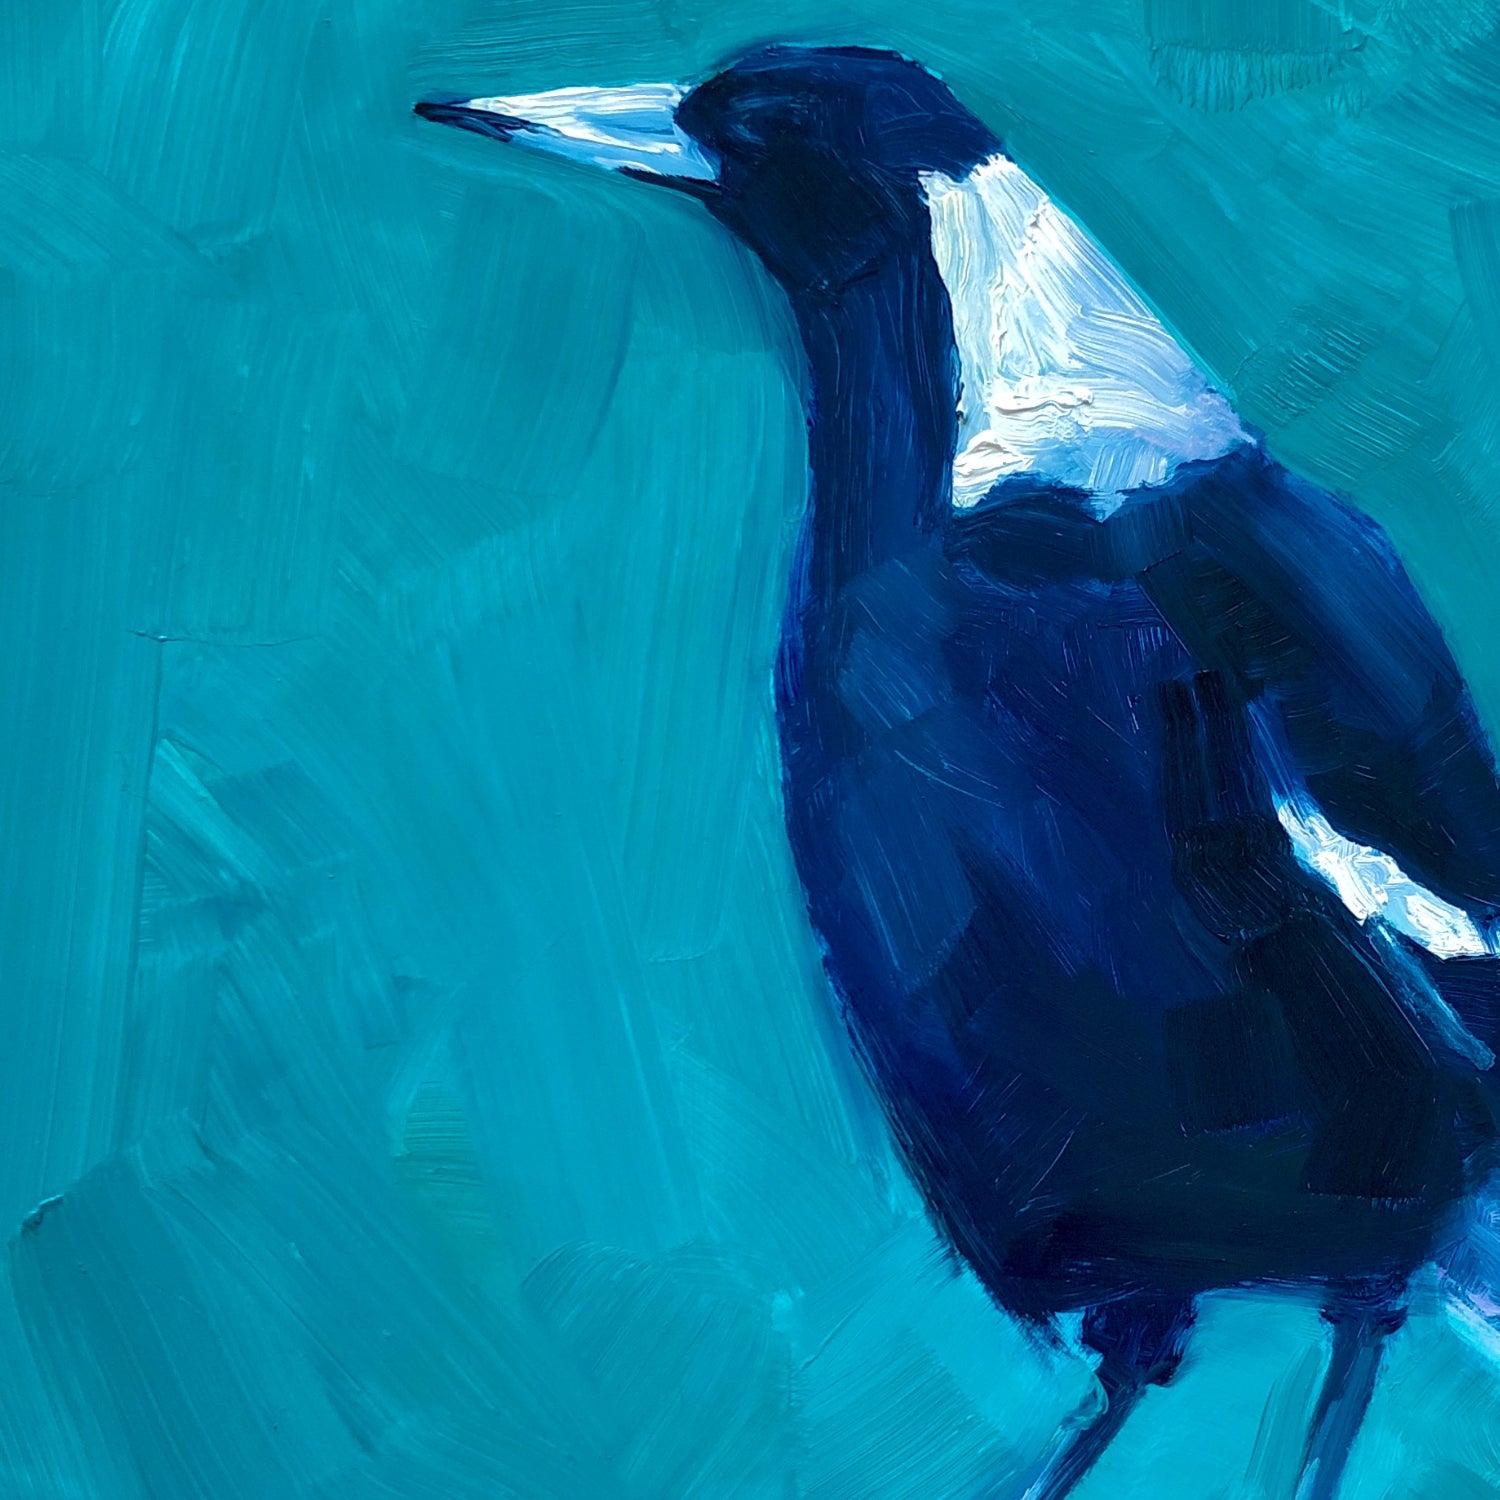 closeup photo of an original oil painting on board of a navy blue and white magpie on a textured turquoise background